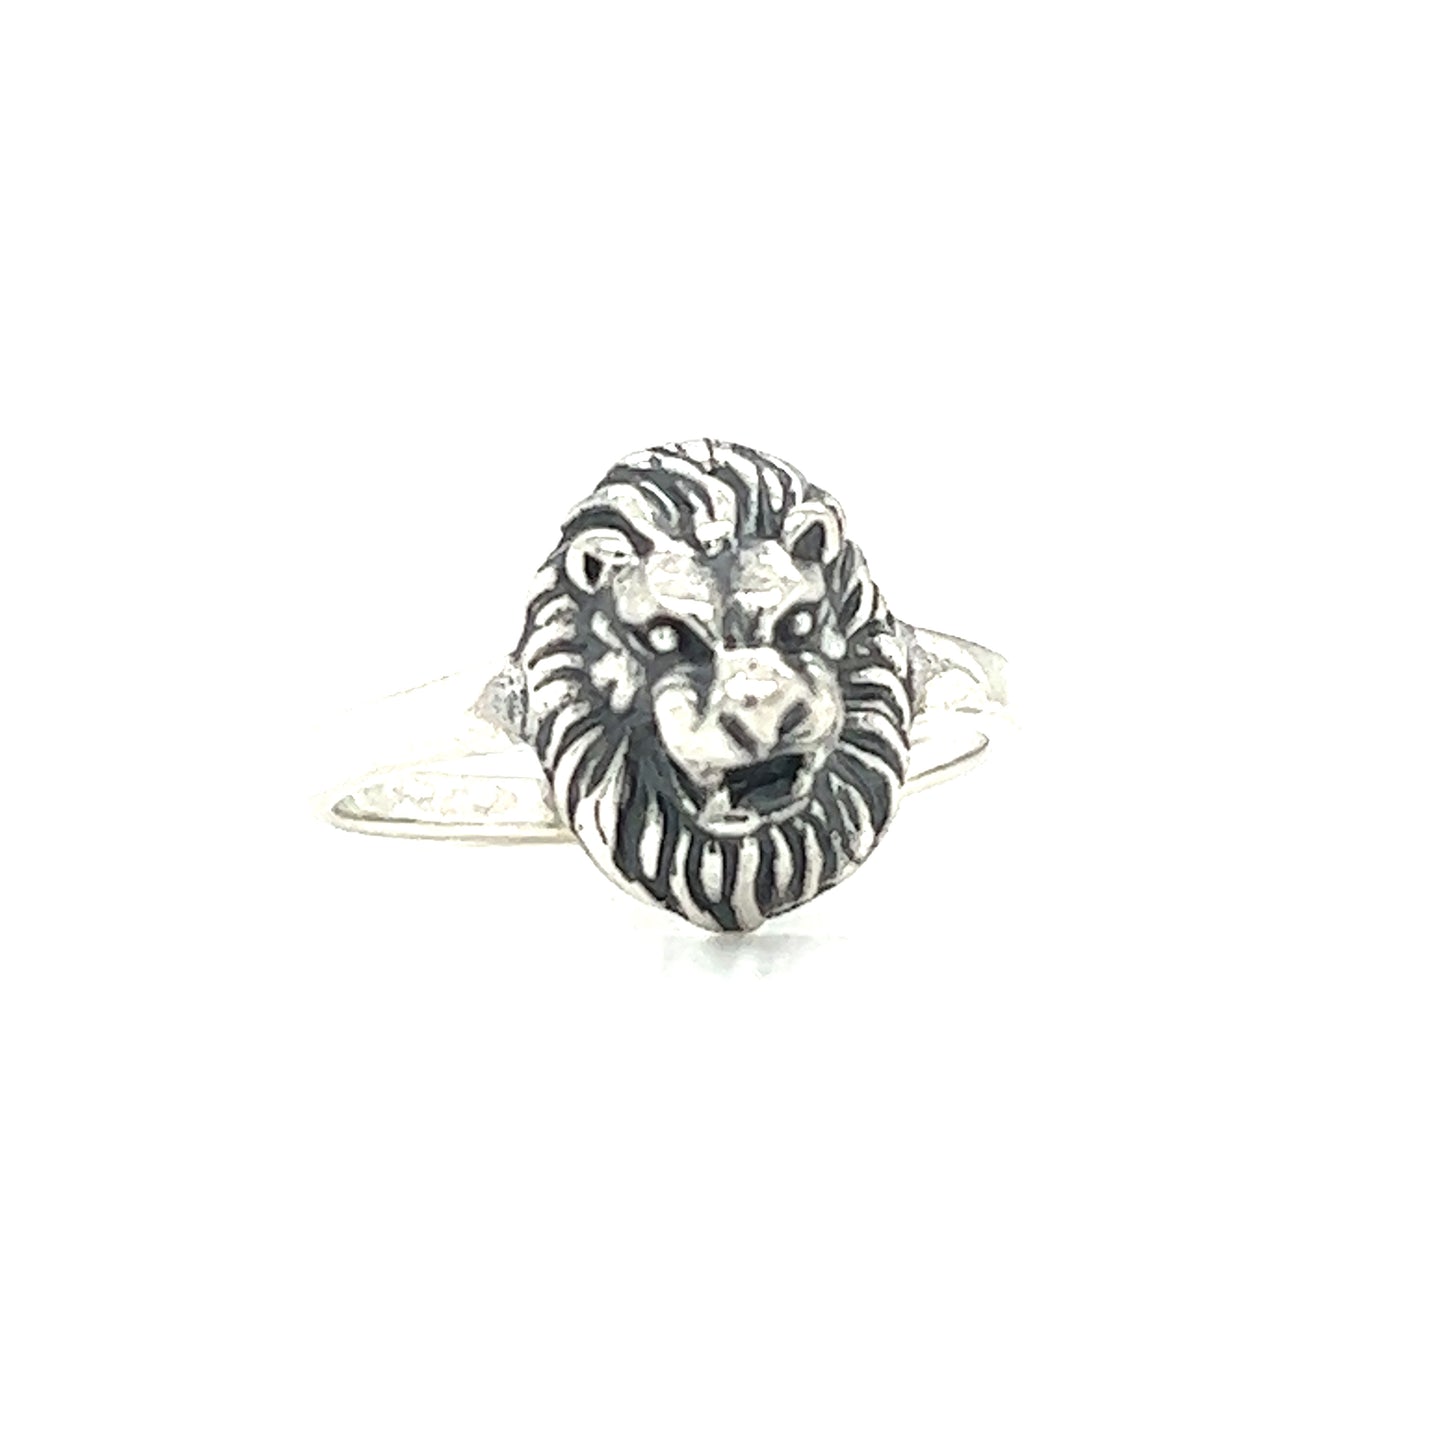 A Lion Face Ring in silver by Super Silver on a white background that exudes authority.